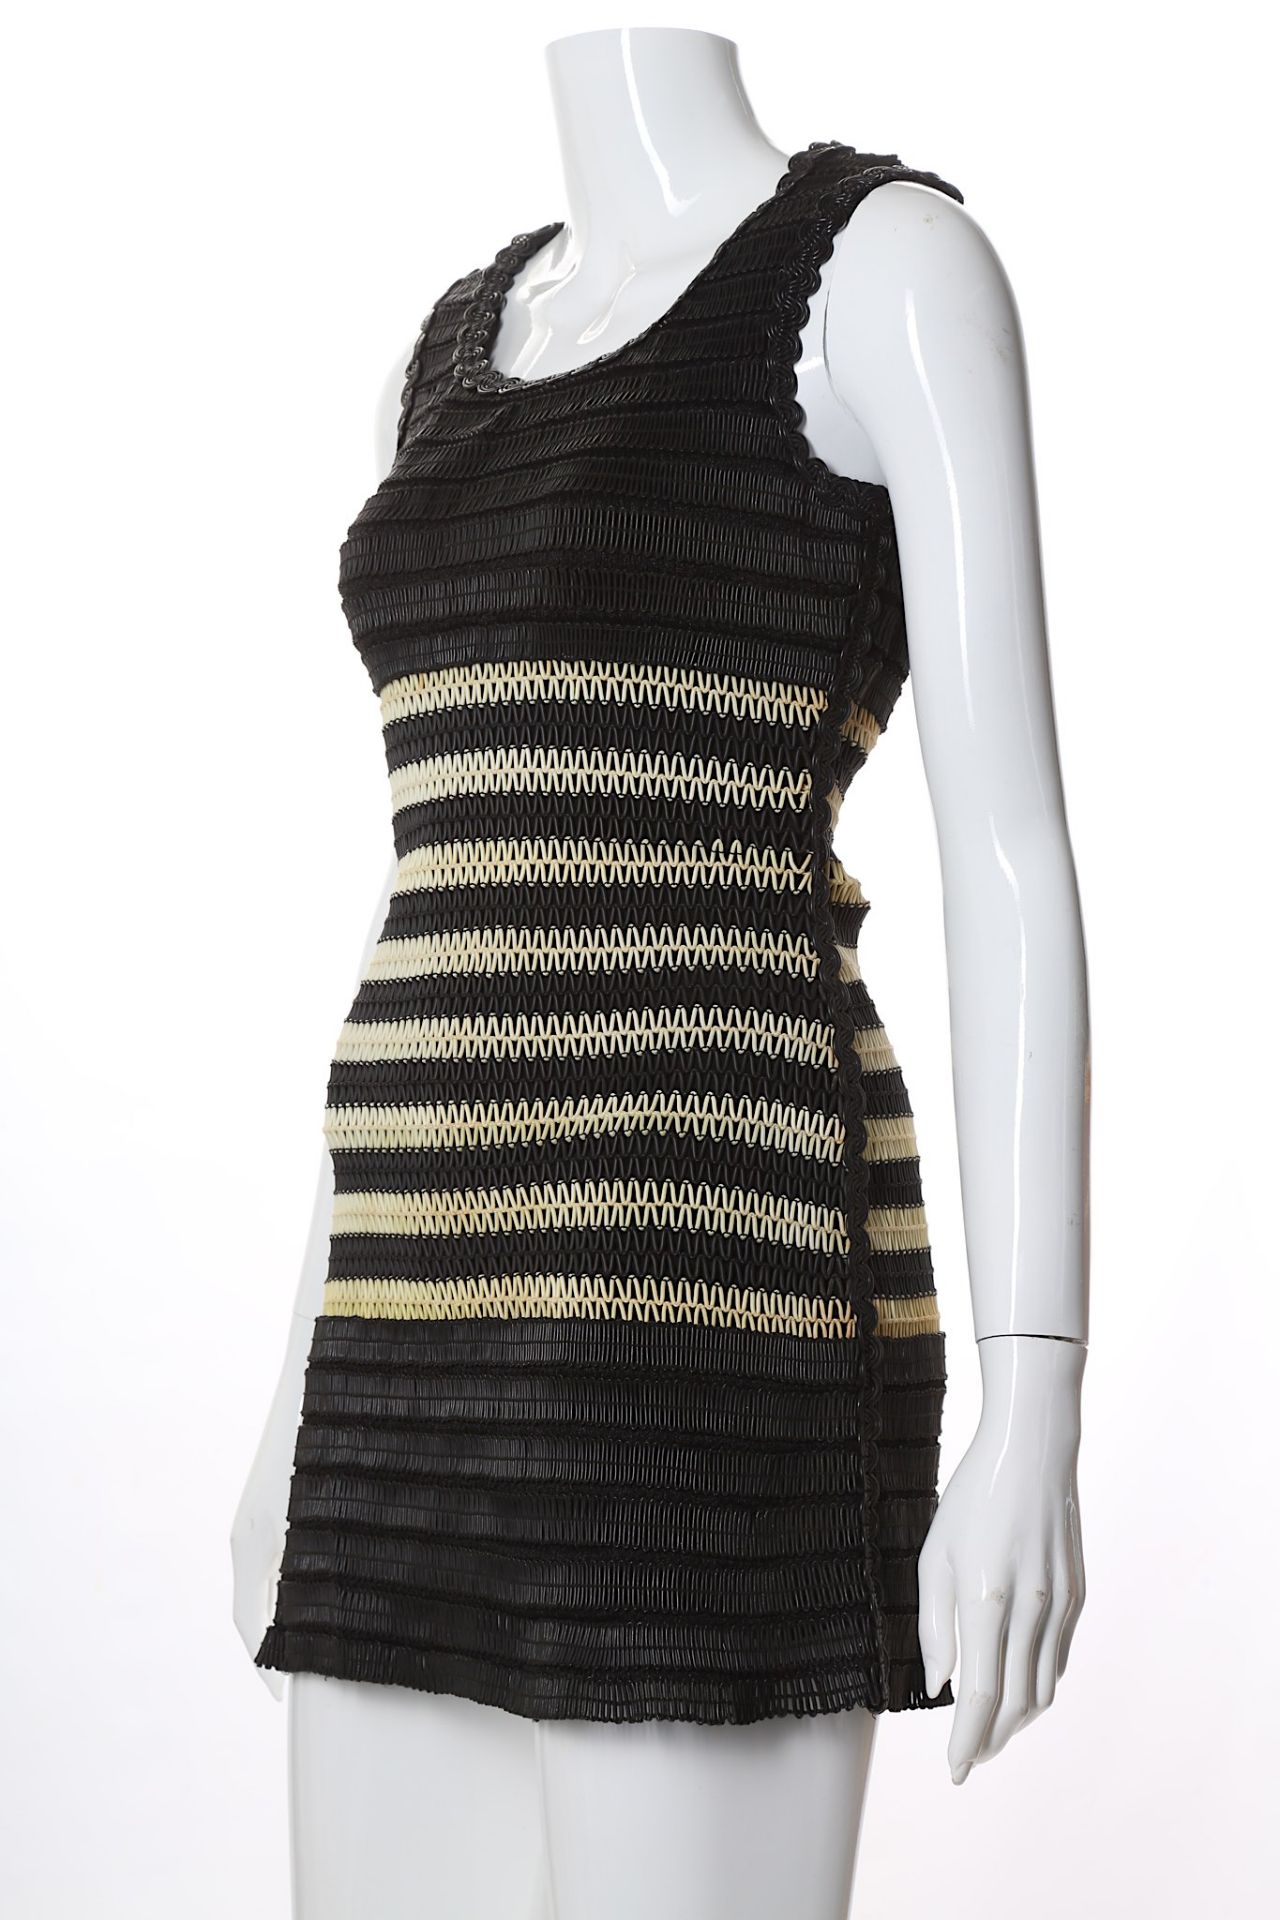 Chanel Boutique Black Rubber Piping Dress, sleeveless design with cream rubber detail, size 38 (UK - Bild 2 aus 6